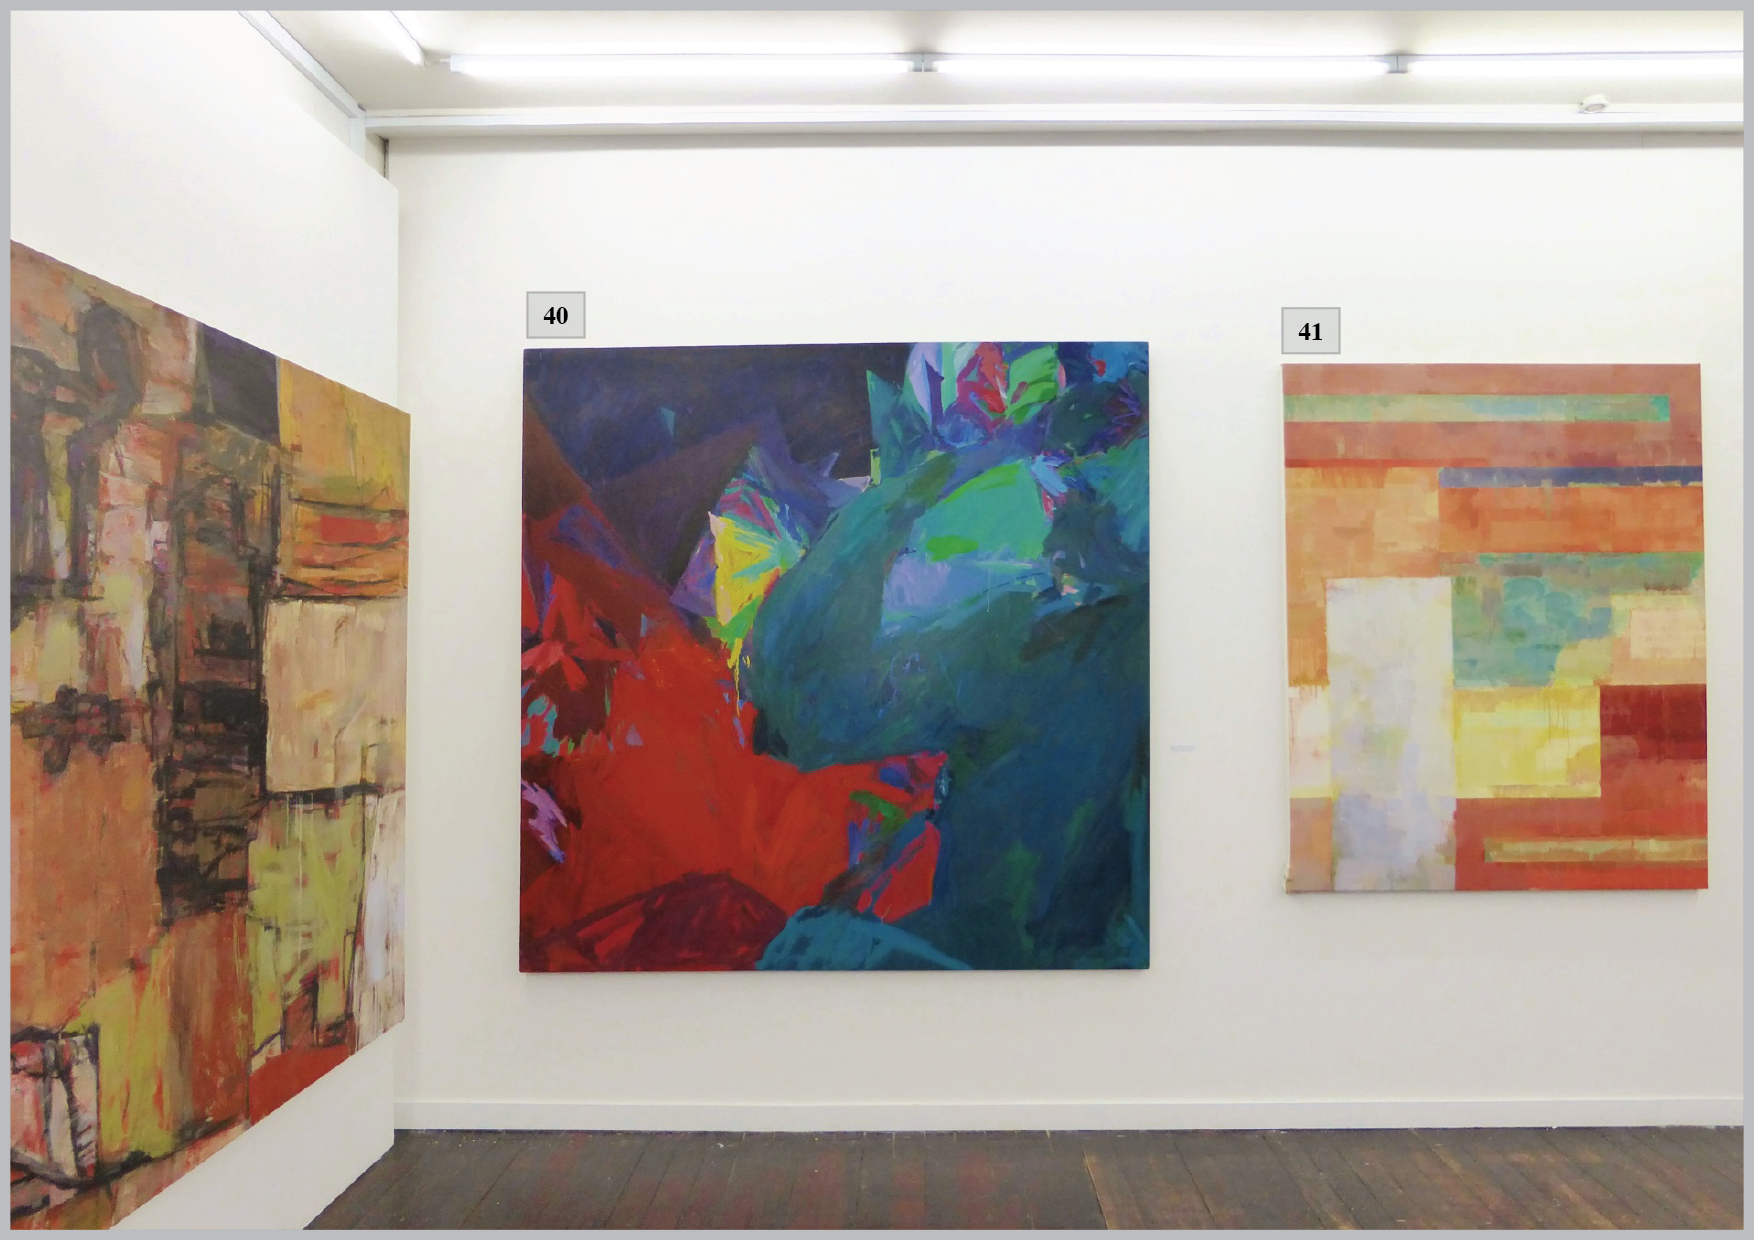 A variety of good looking colourful abstract artworks from an award winning international artist for sale